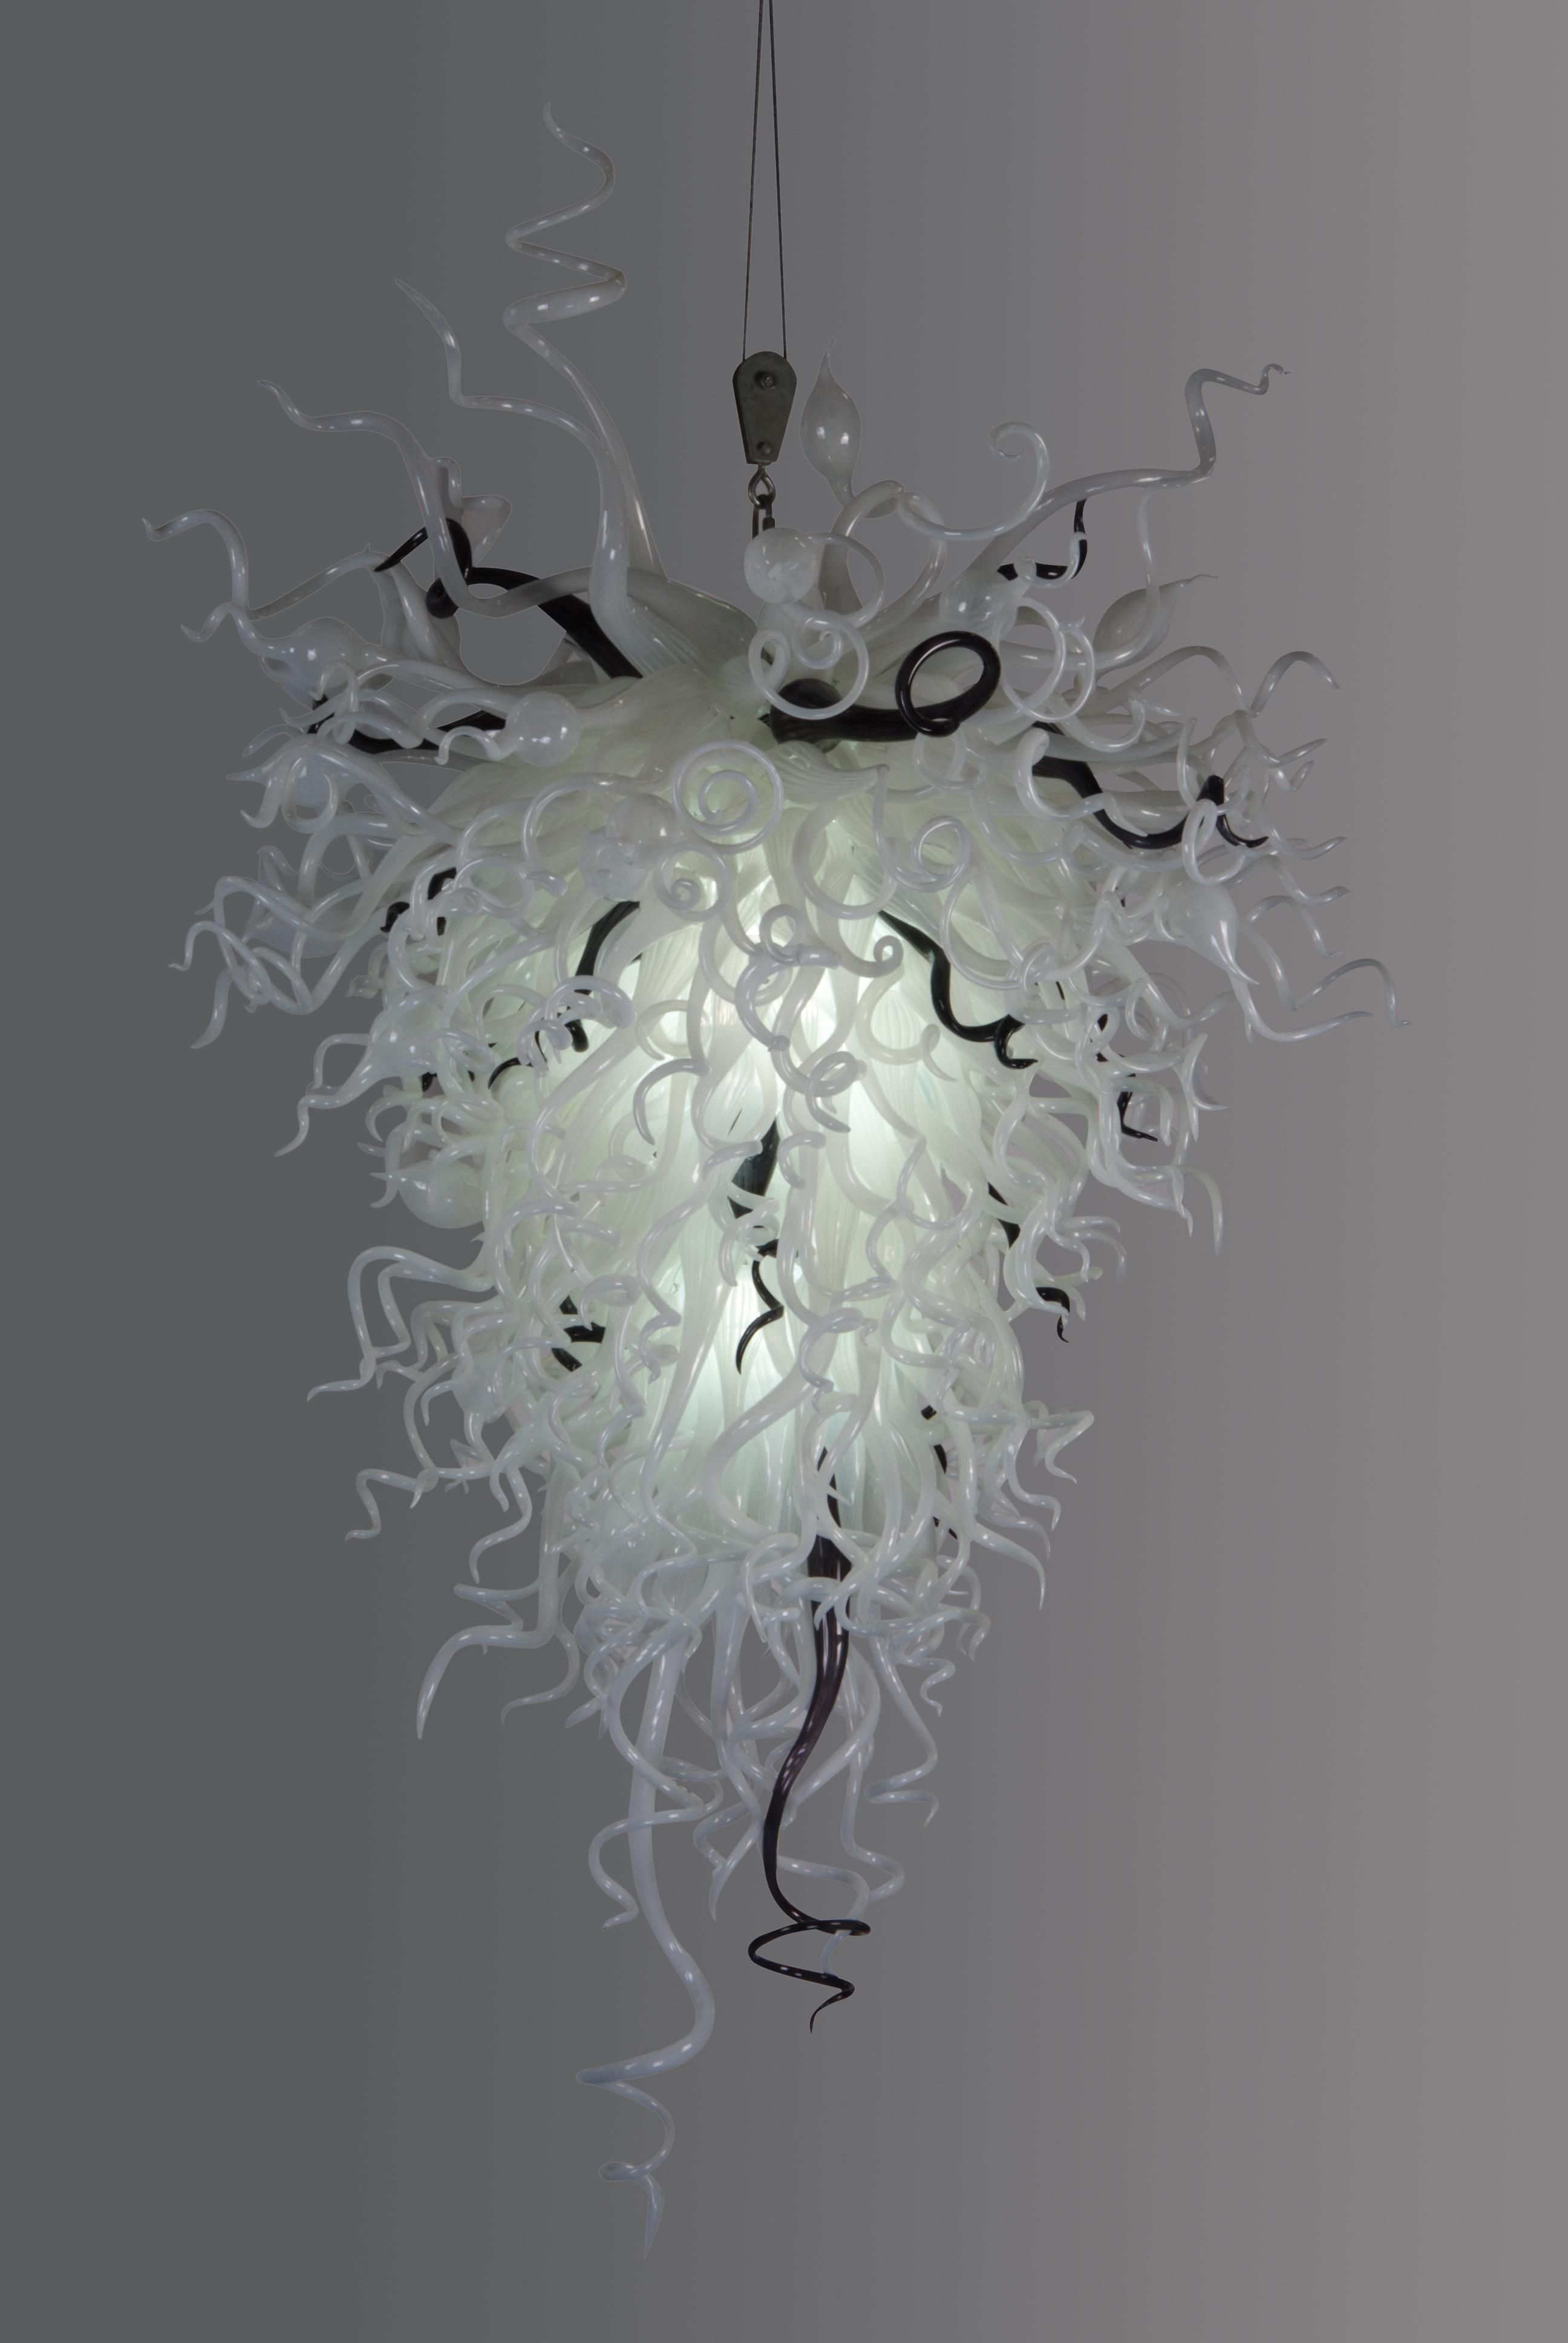 [%led Source 100% Hand Blown Borosilicate Glass Dale Chihuly Murano In Most Popular Black Glass Chandeliers|black Glass Chandeliers Pertaining To Current Led Source 100% Hand Blown Borosilicate Glass Dale Chihuly Murano|current Black Glass Chandeliers In Led Source 100% Hand Blown Borosilicate Glass Dale Chihuly Murano|fashionable Led Source 100% Hand Blown Borosilicate Glass Dale Chihuly Murano Intended For Black Glass Chandeliers%] (View 18 of 20)